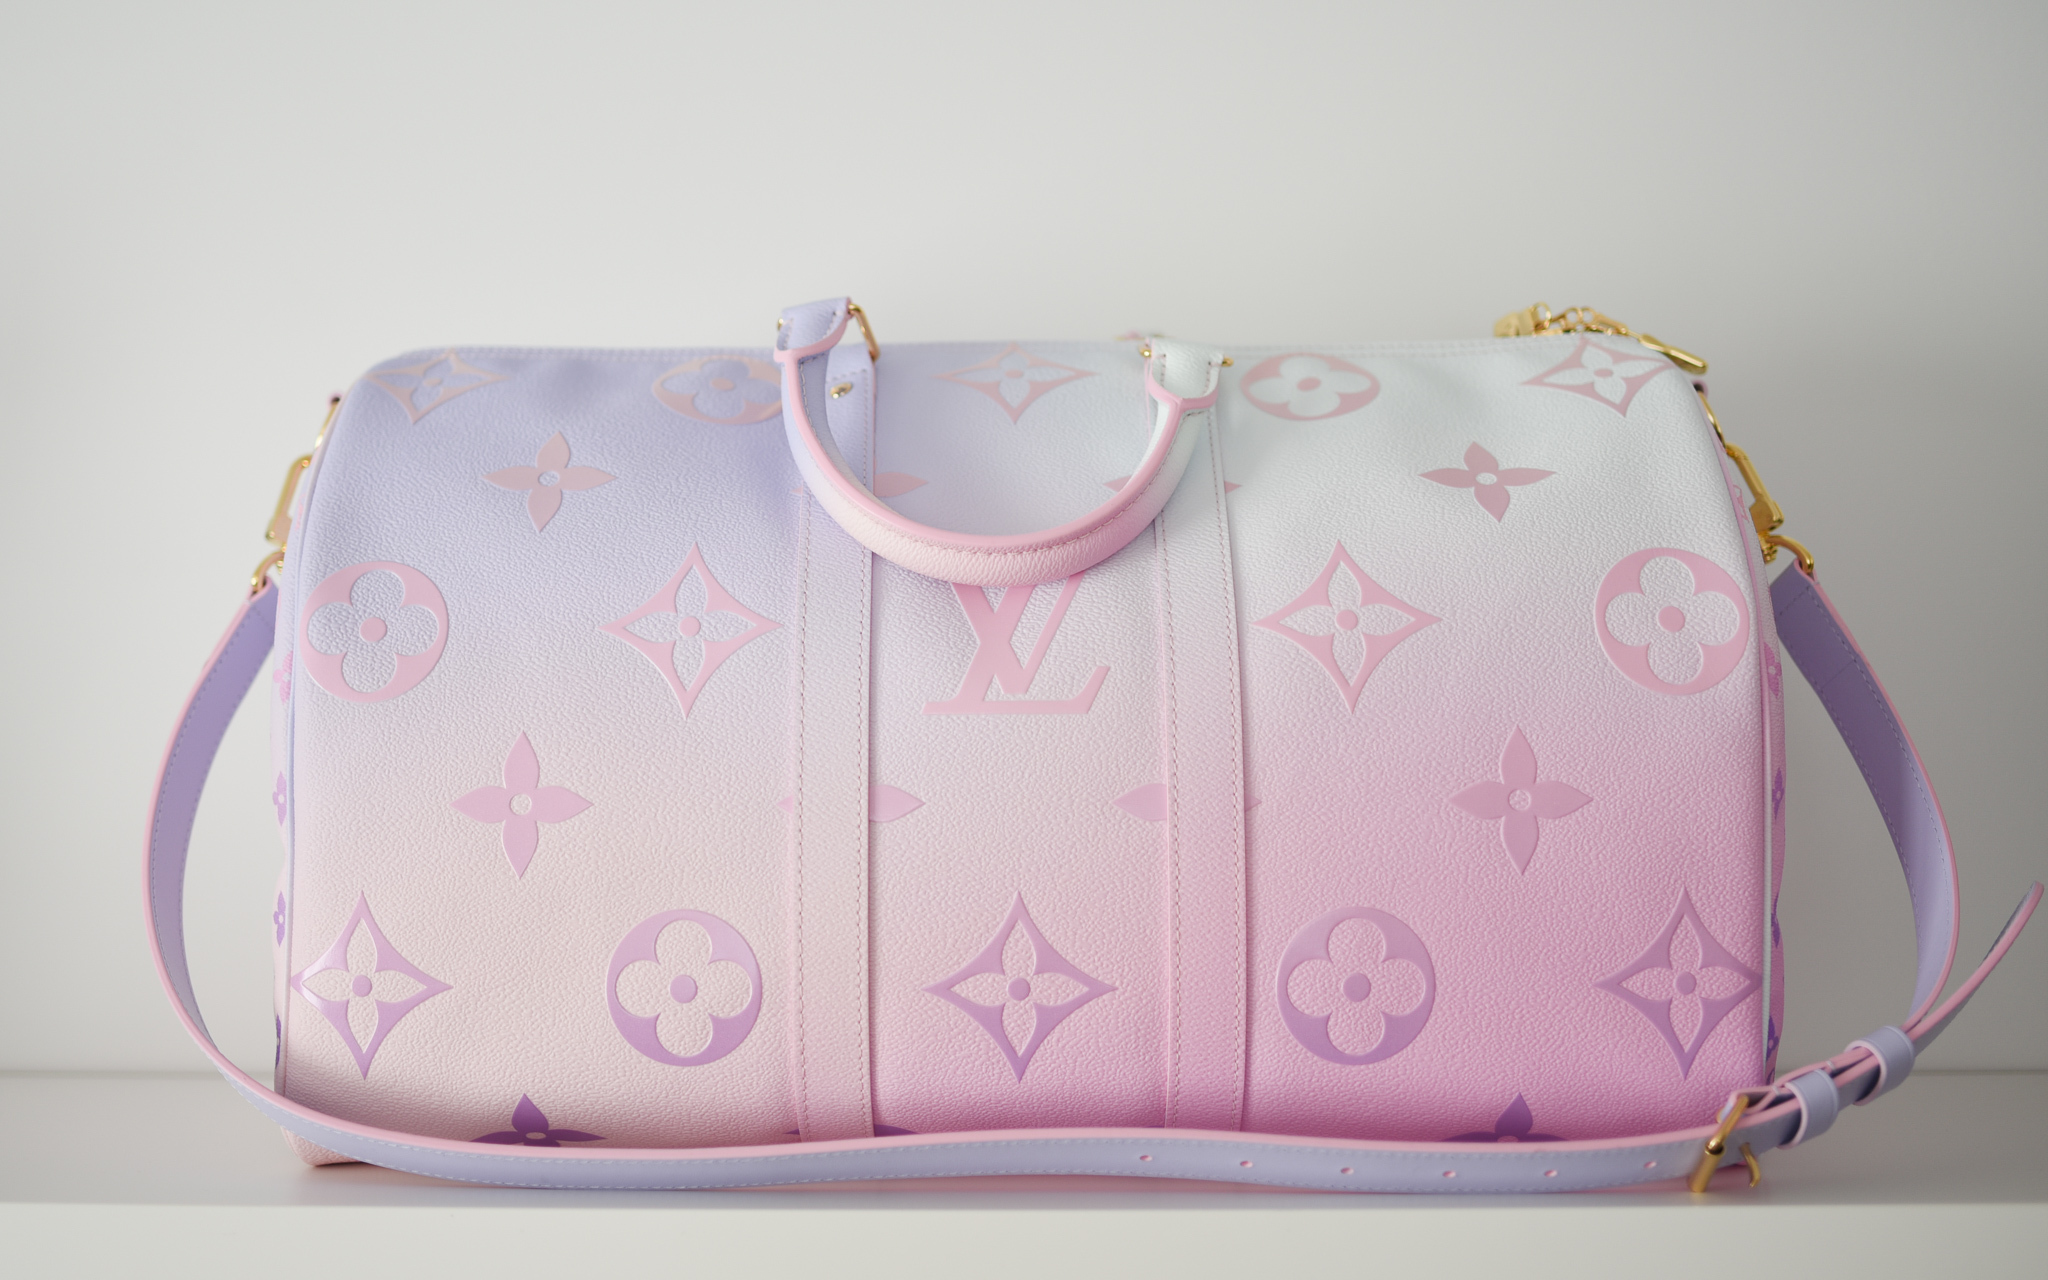 LV Keepall 45ba in the Pastel collection how beautiful is she